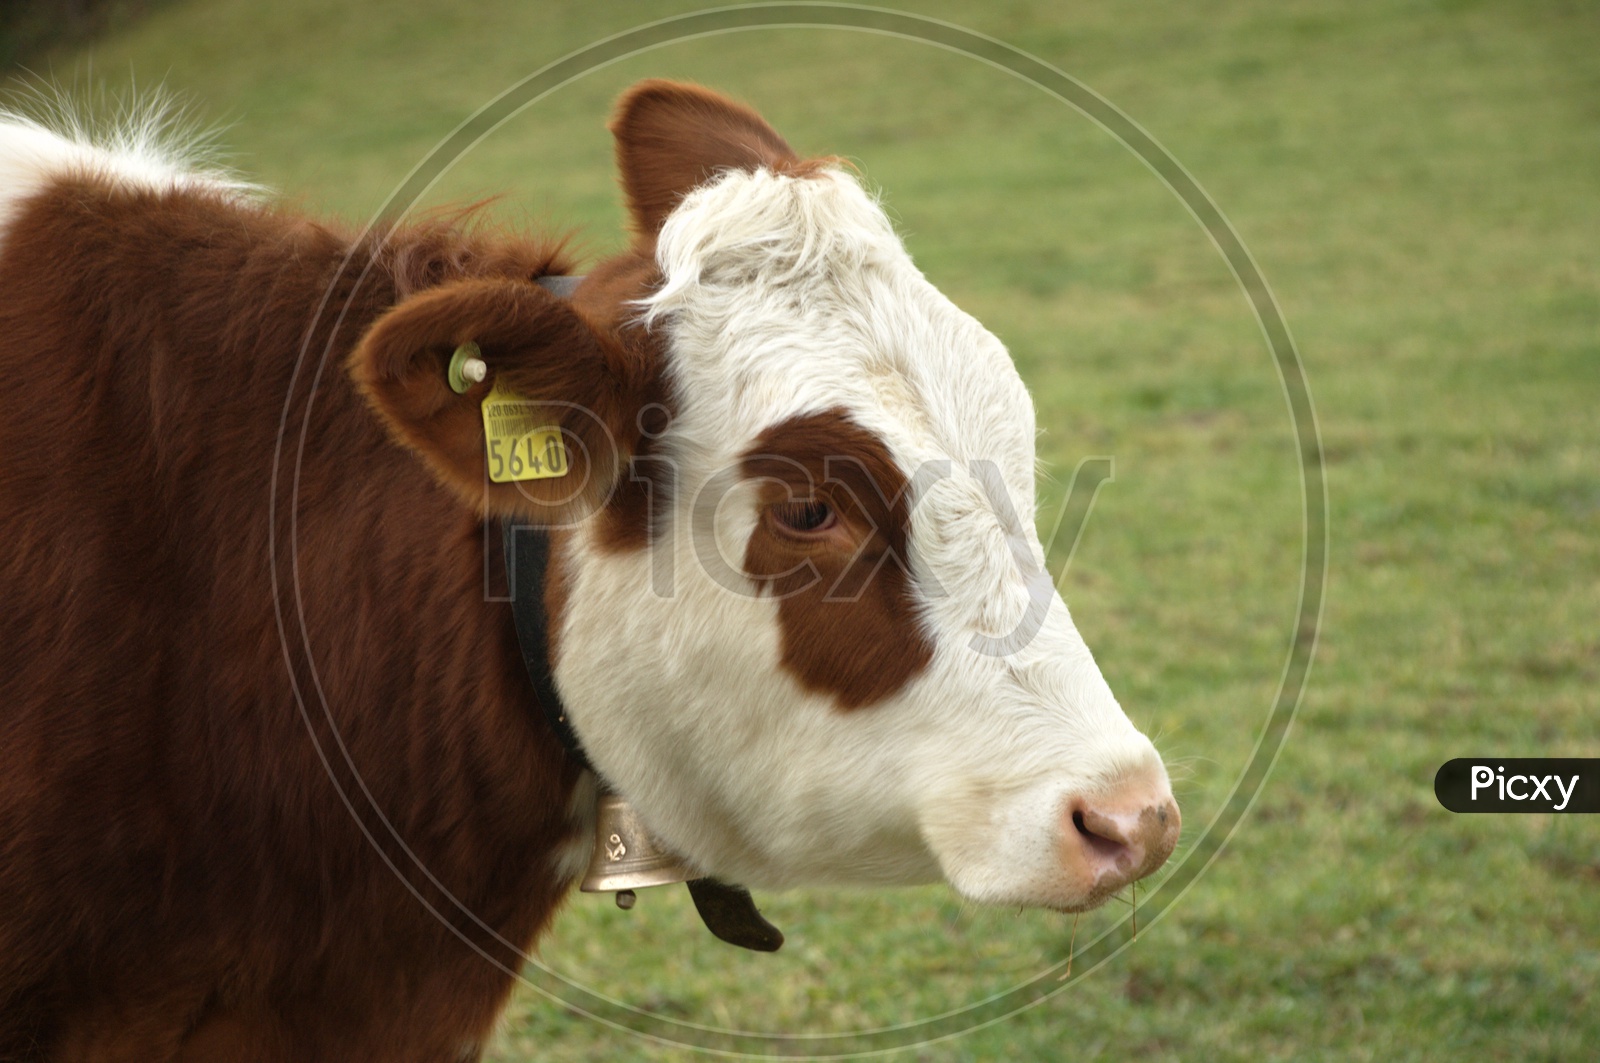 A white and brown coloured cow with tags on the ears